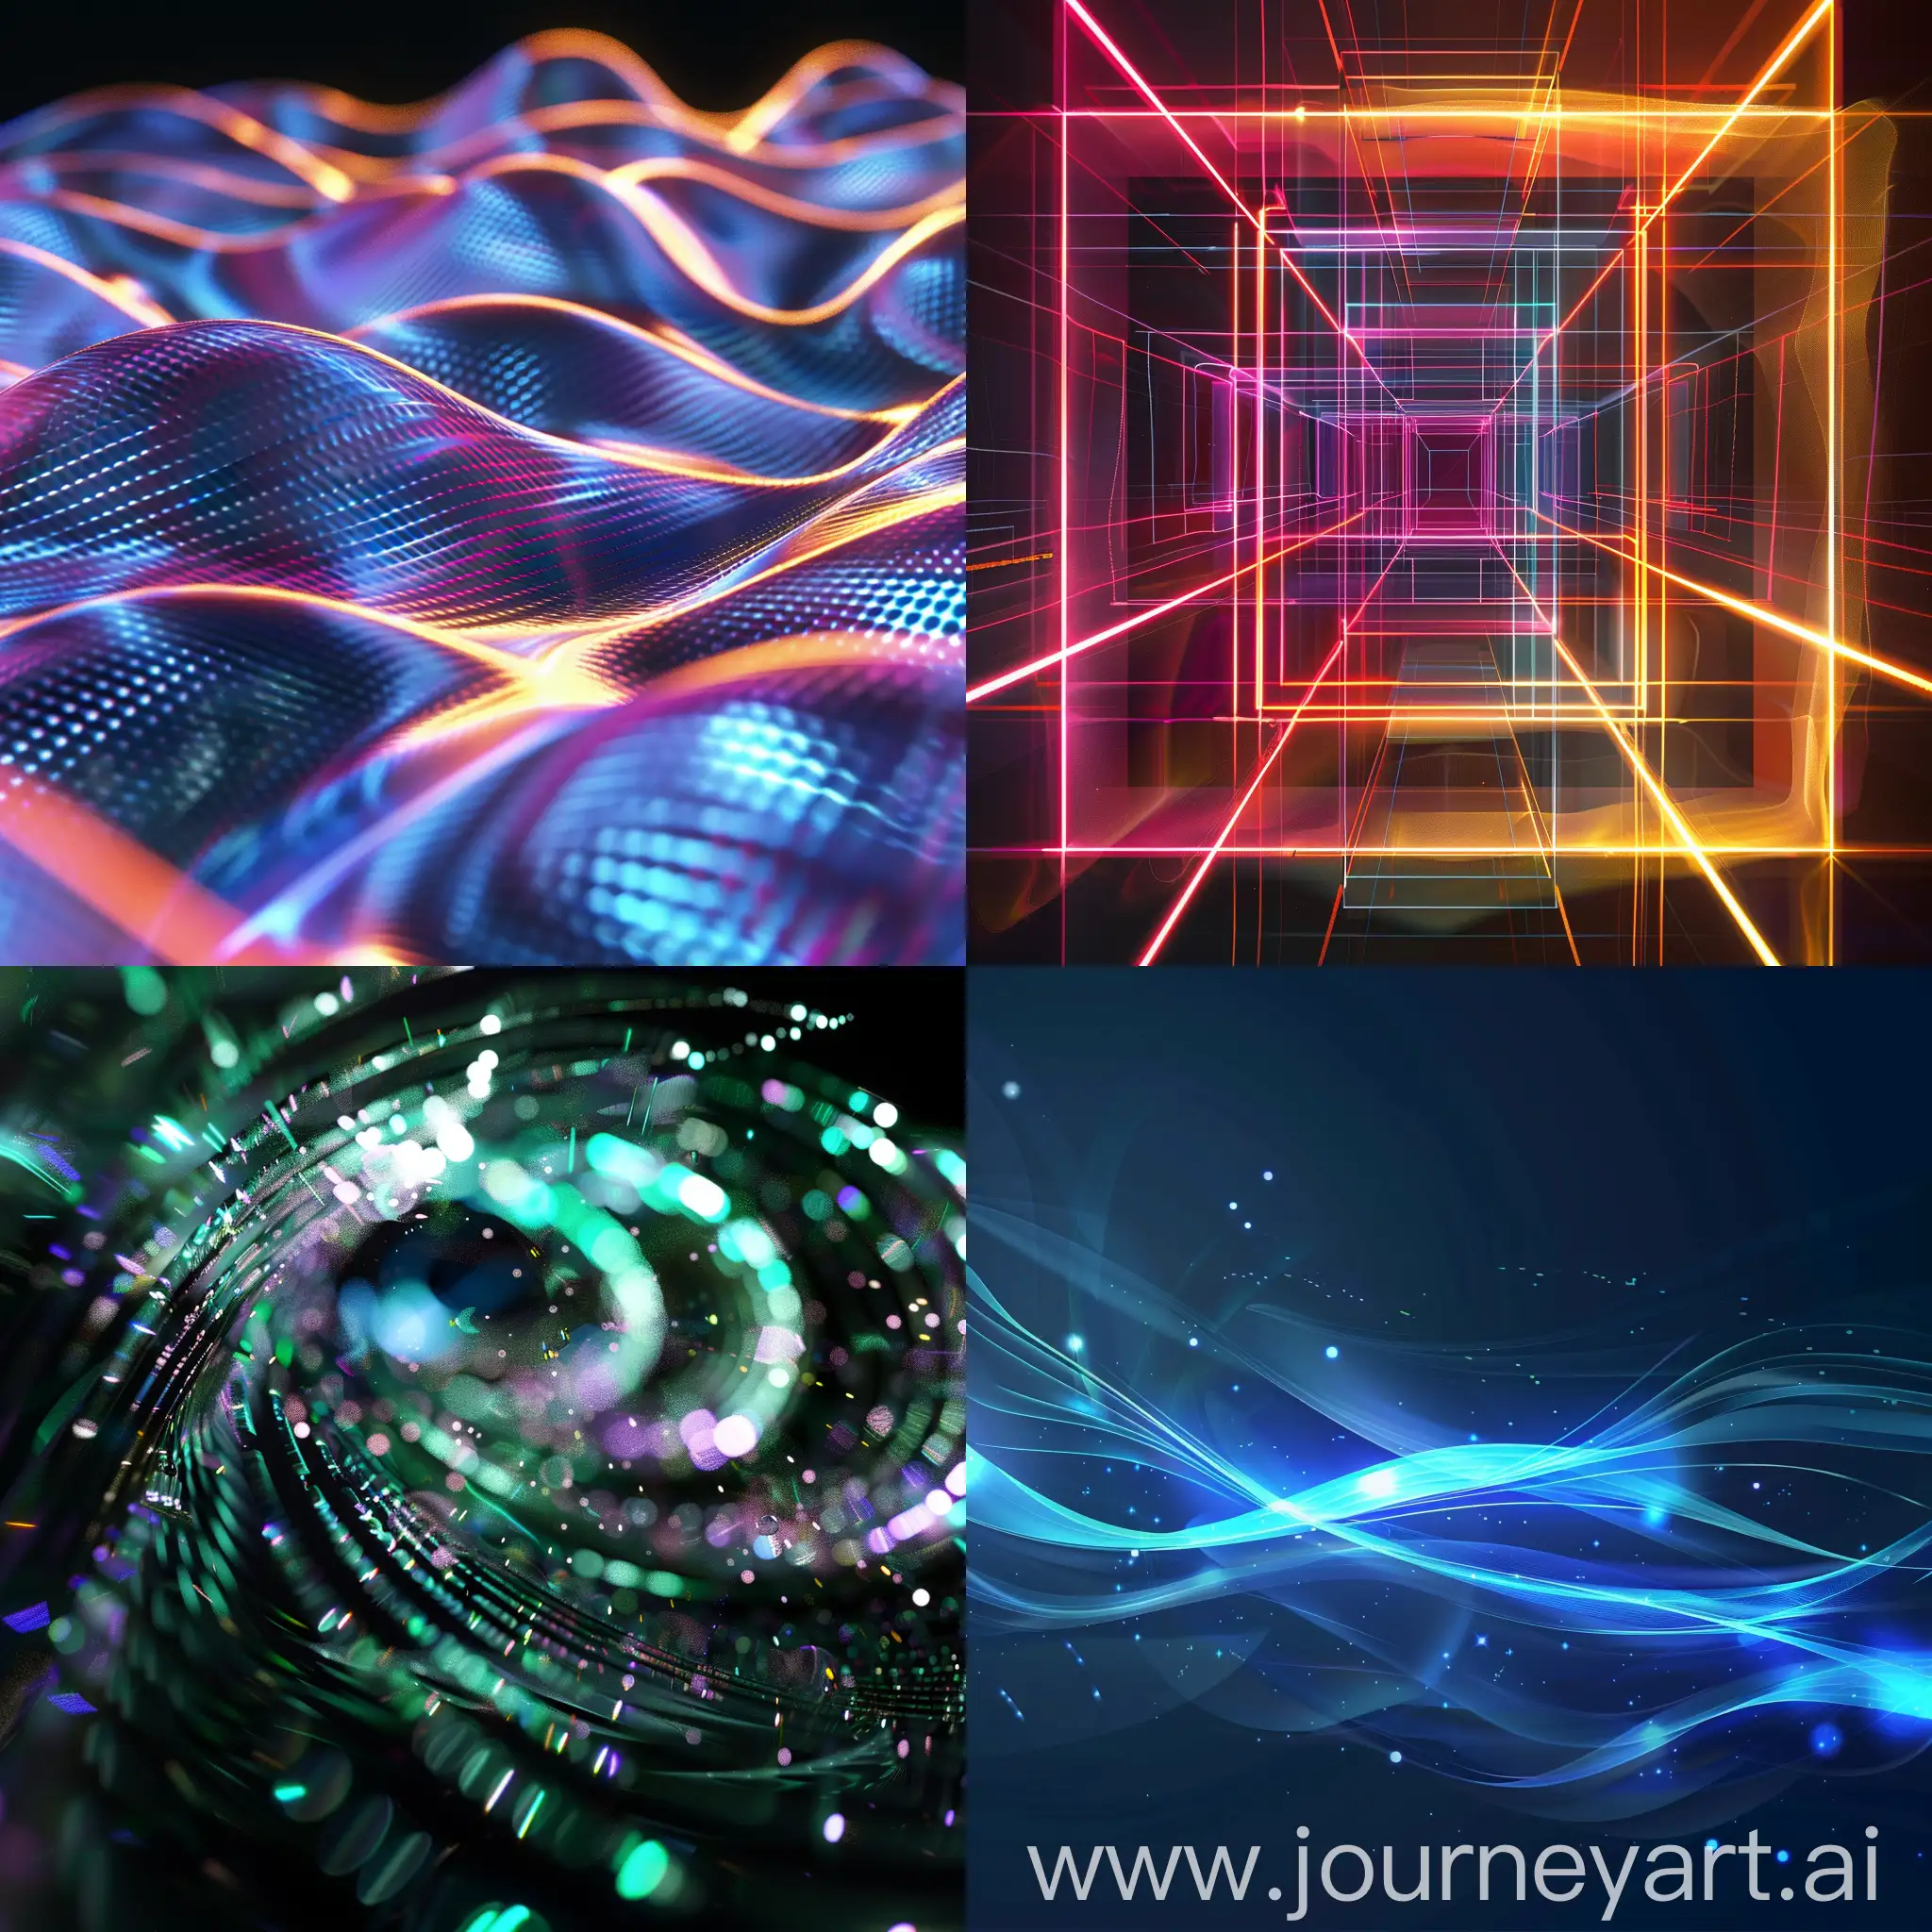 Vibrant-Holographic-Landscape-with-Abstract-Shapes